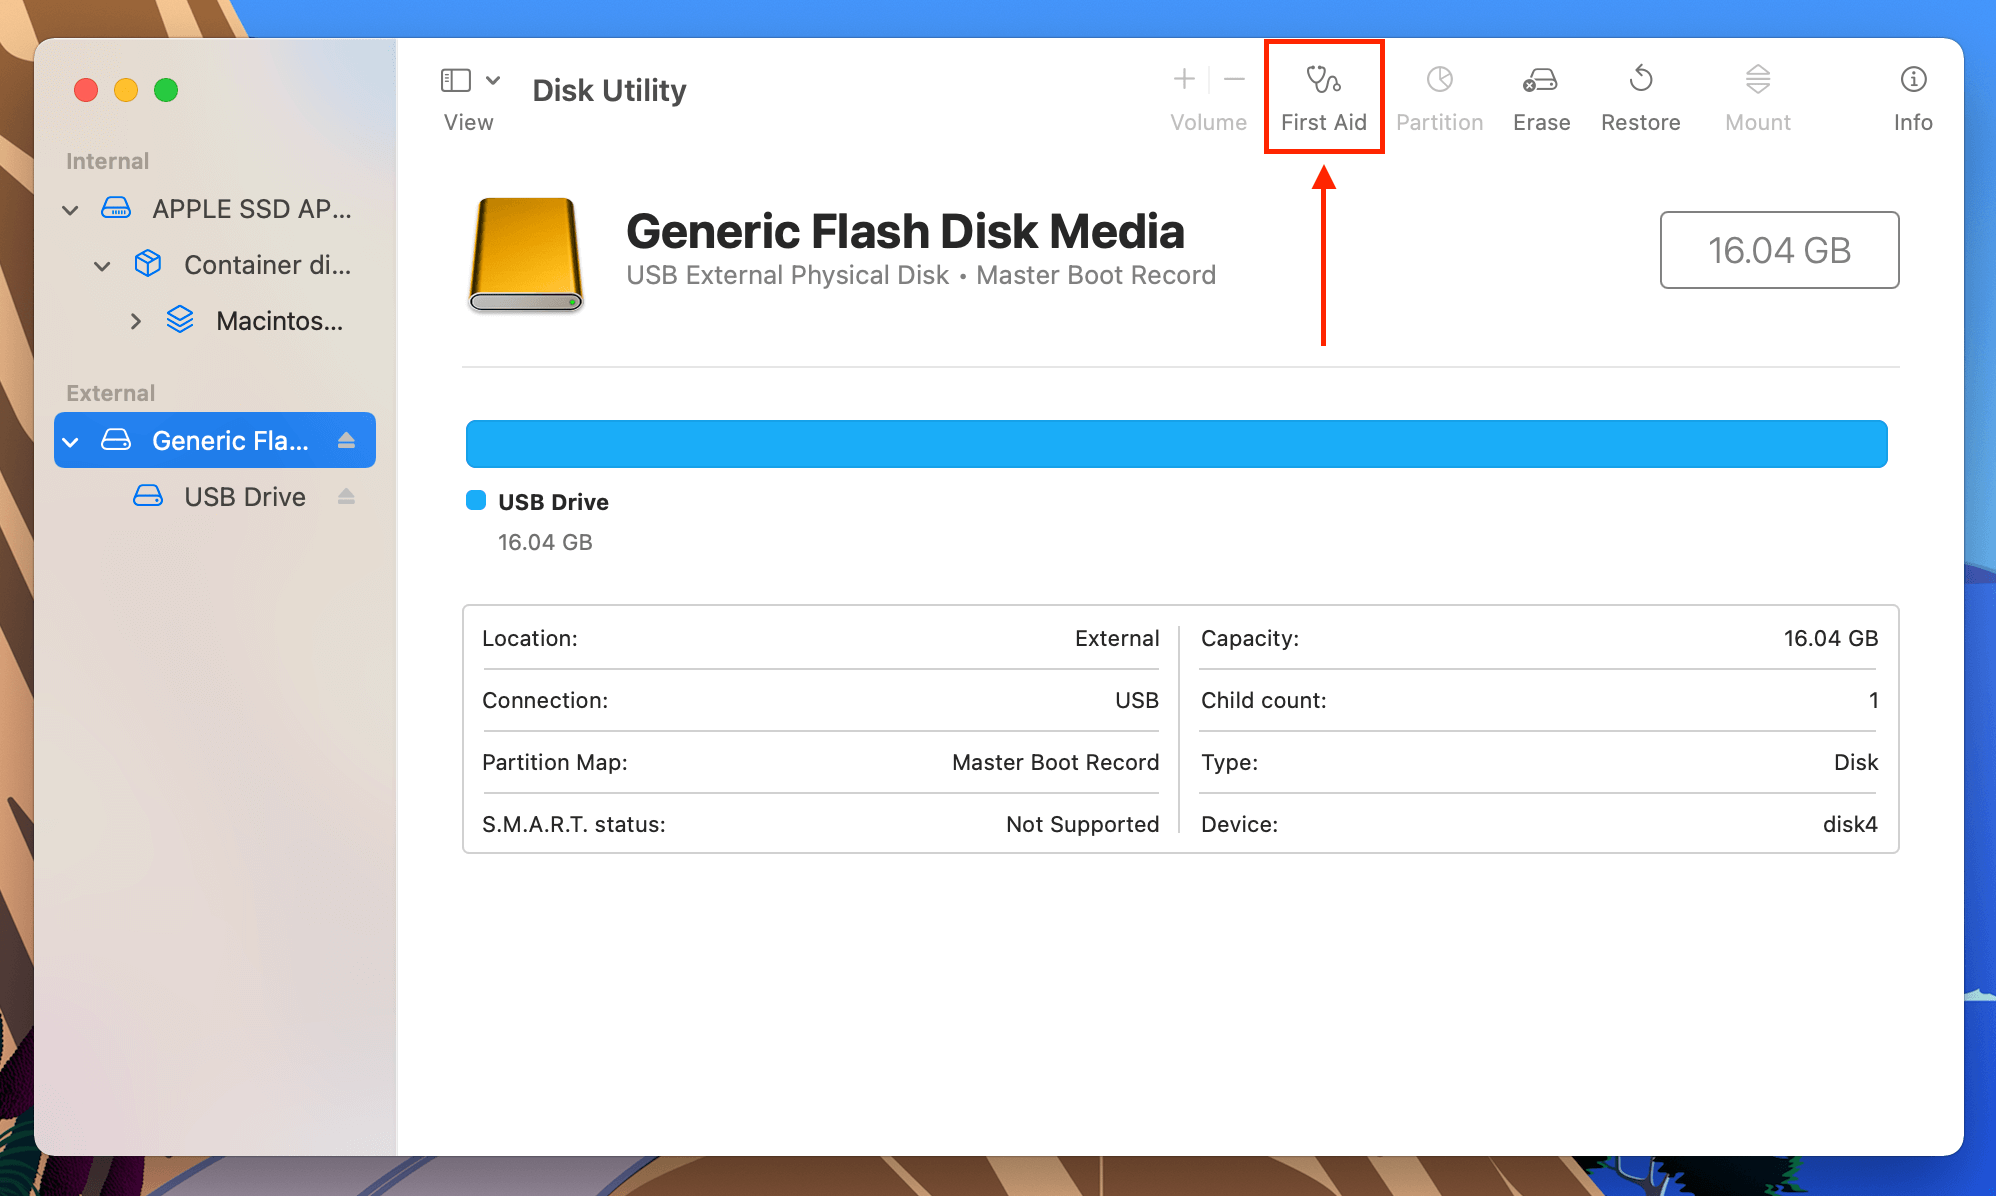 First Aid button in the Disk Utility window